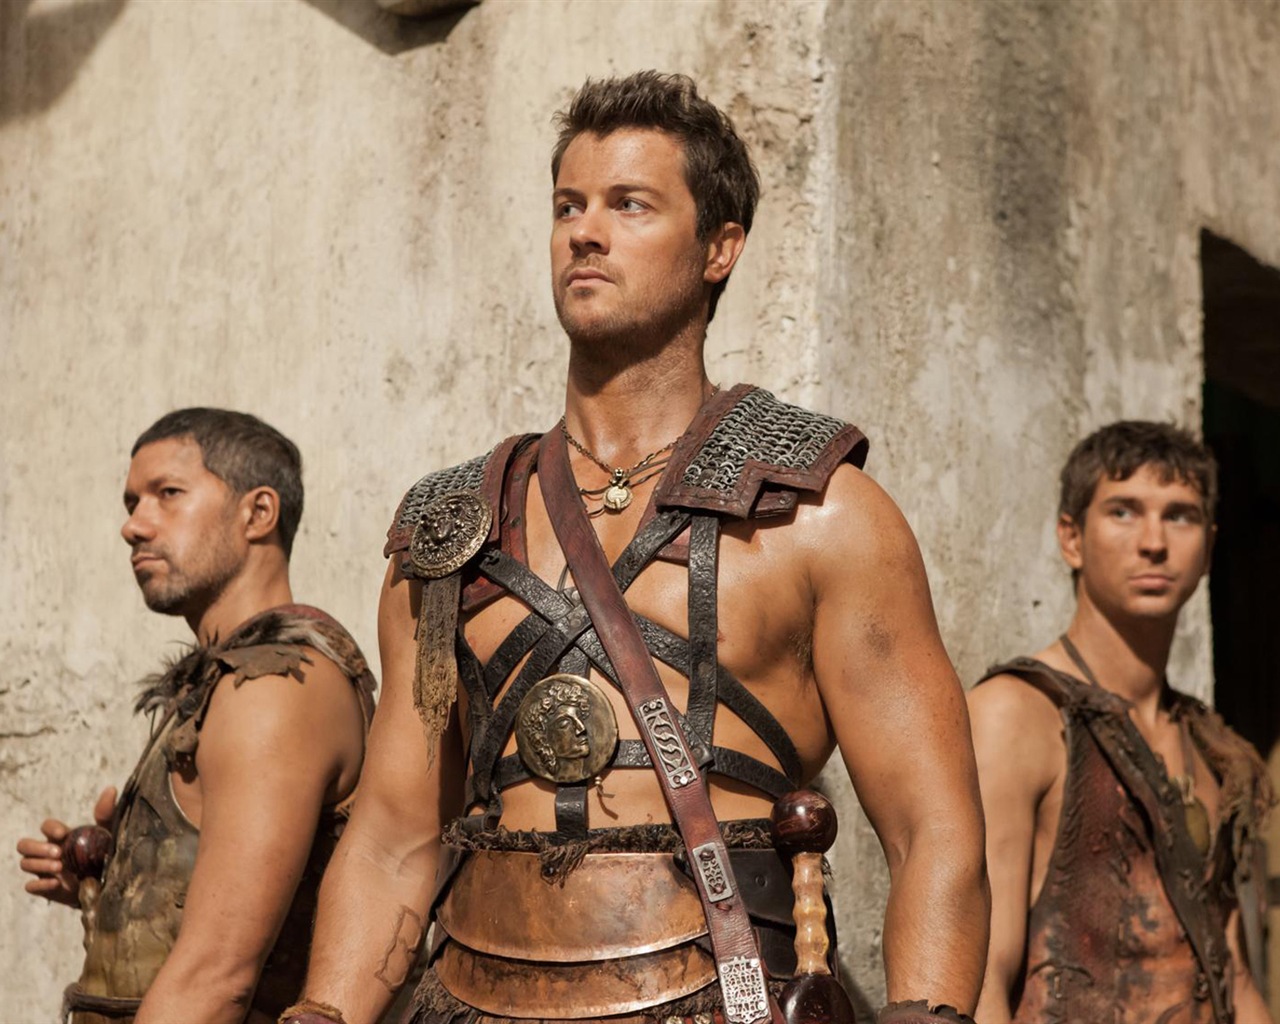 Spartacus: War of the Damned HD Wallpaper #4 - 1280x1024